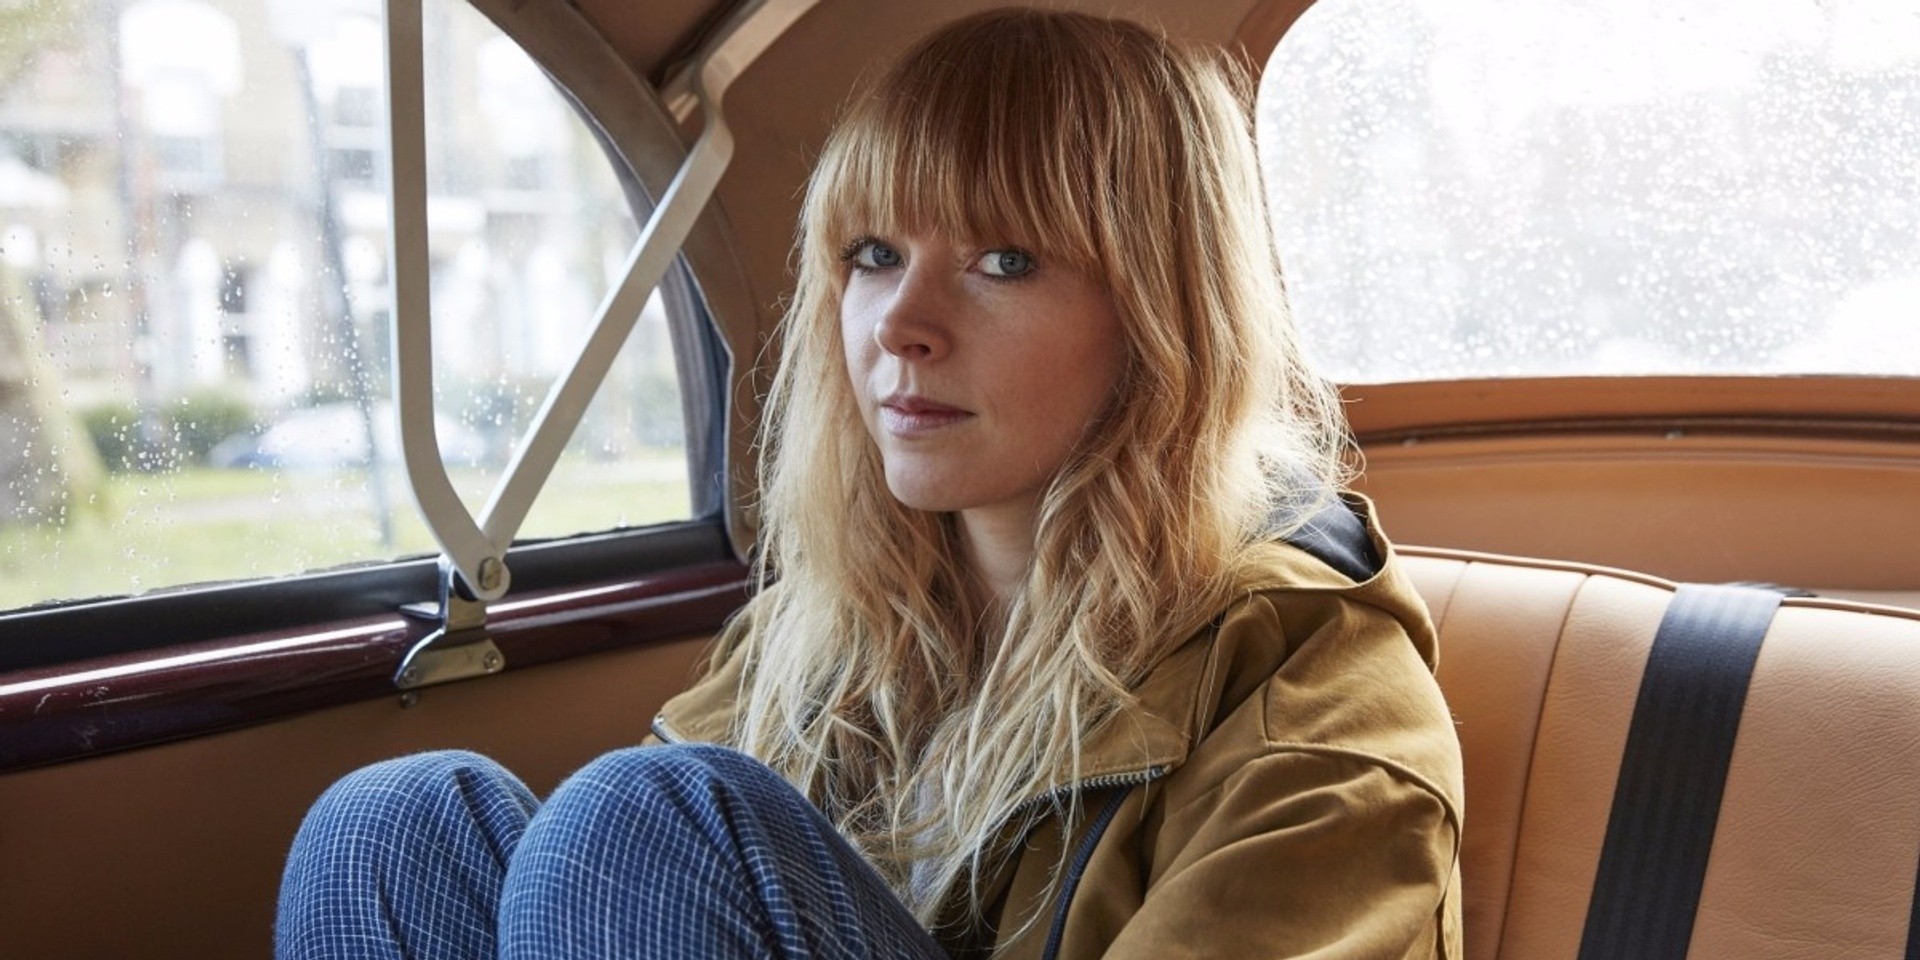 Lucy Rose launches vote for your hometown campaign